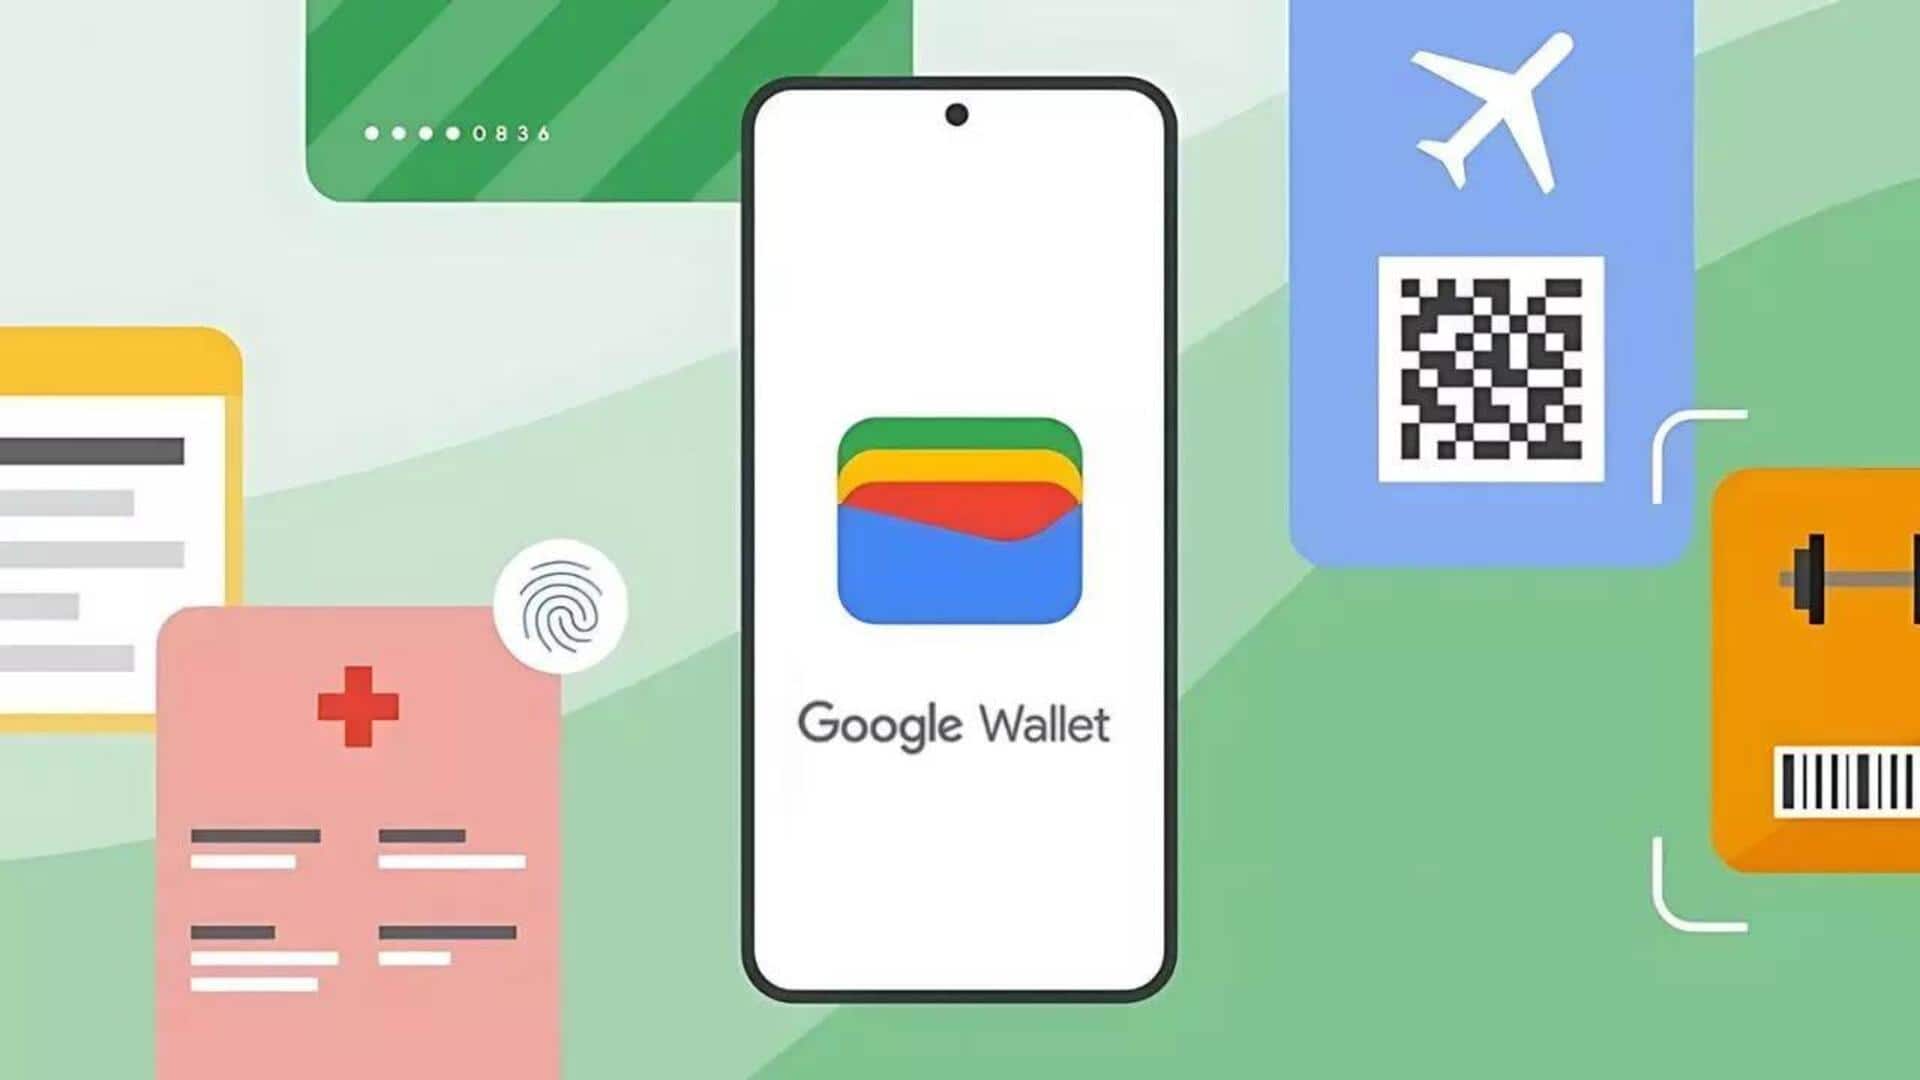 Google Wallet launched in India: Will it replace Google Pay?